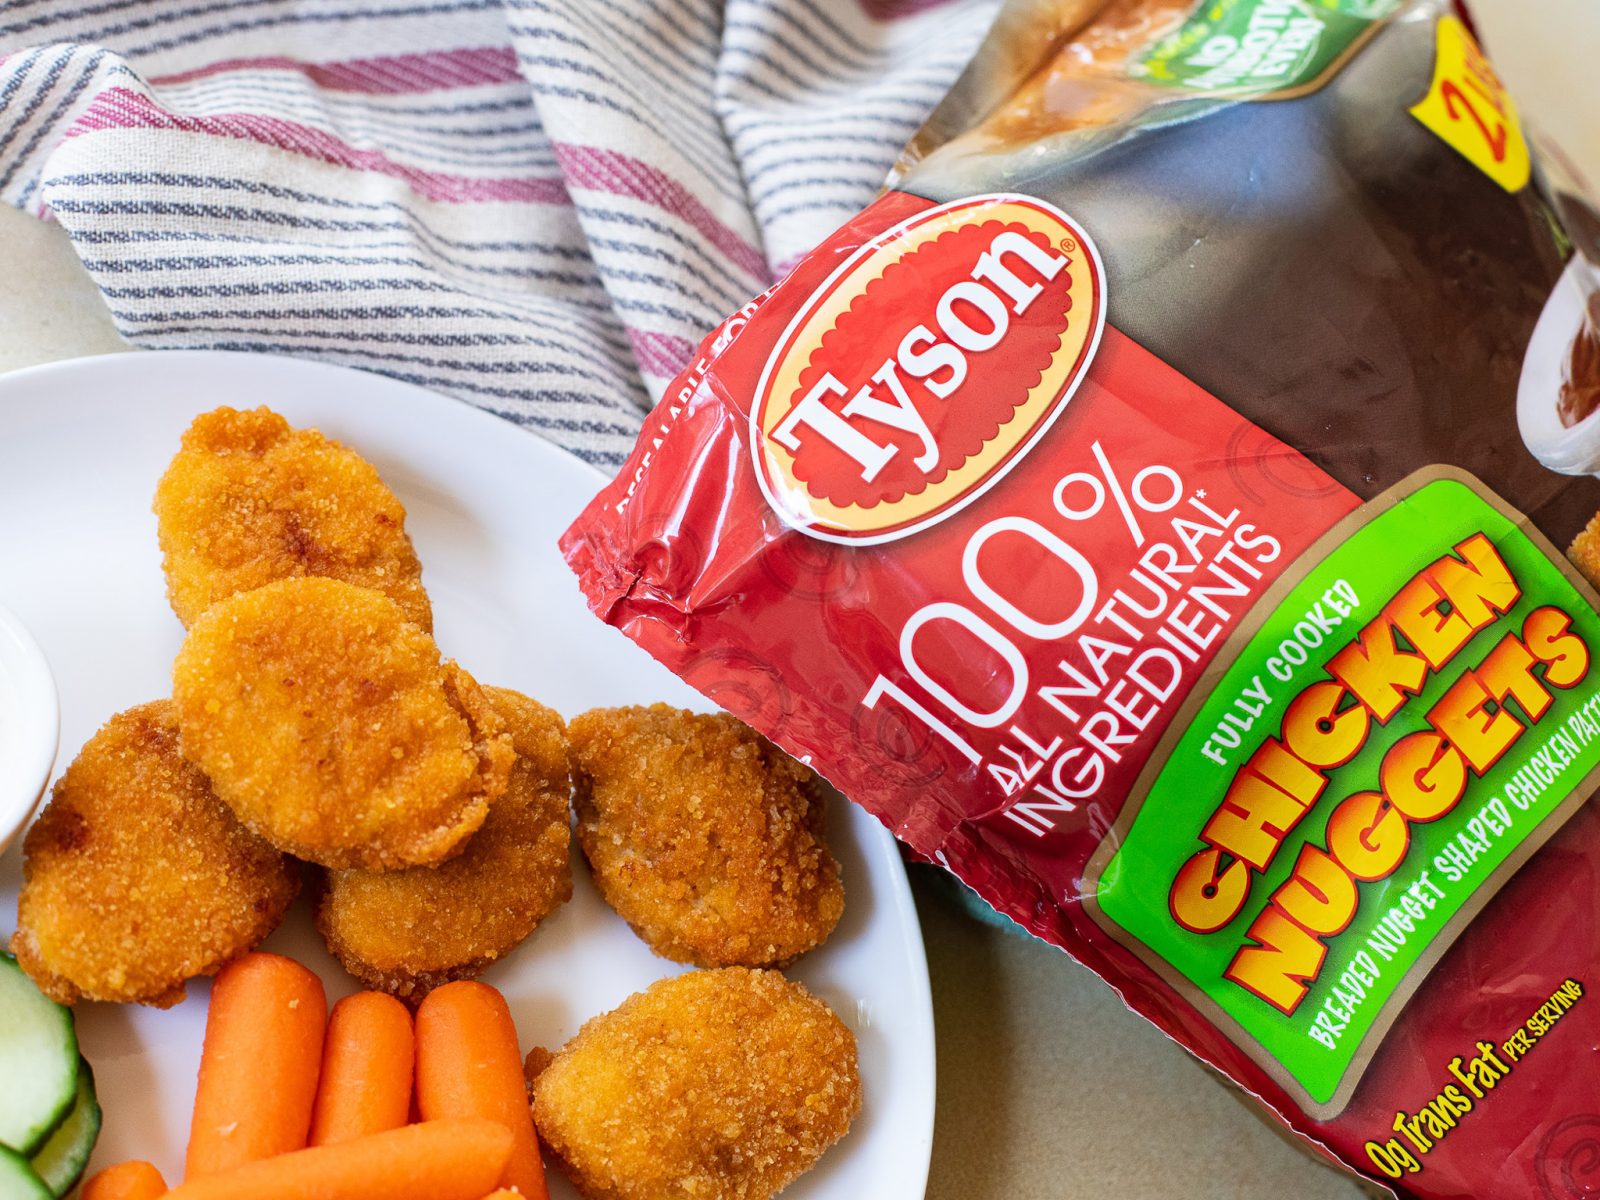 Big Bags Of Tyson Frozen Chicken Only $9.99 At Kroger